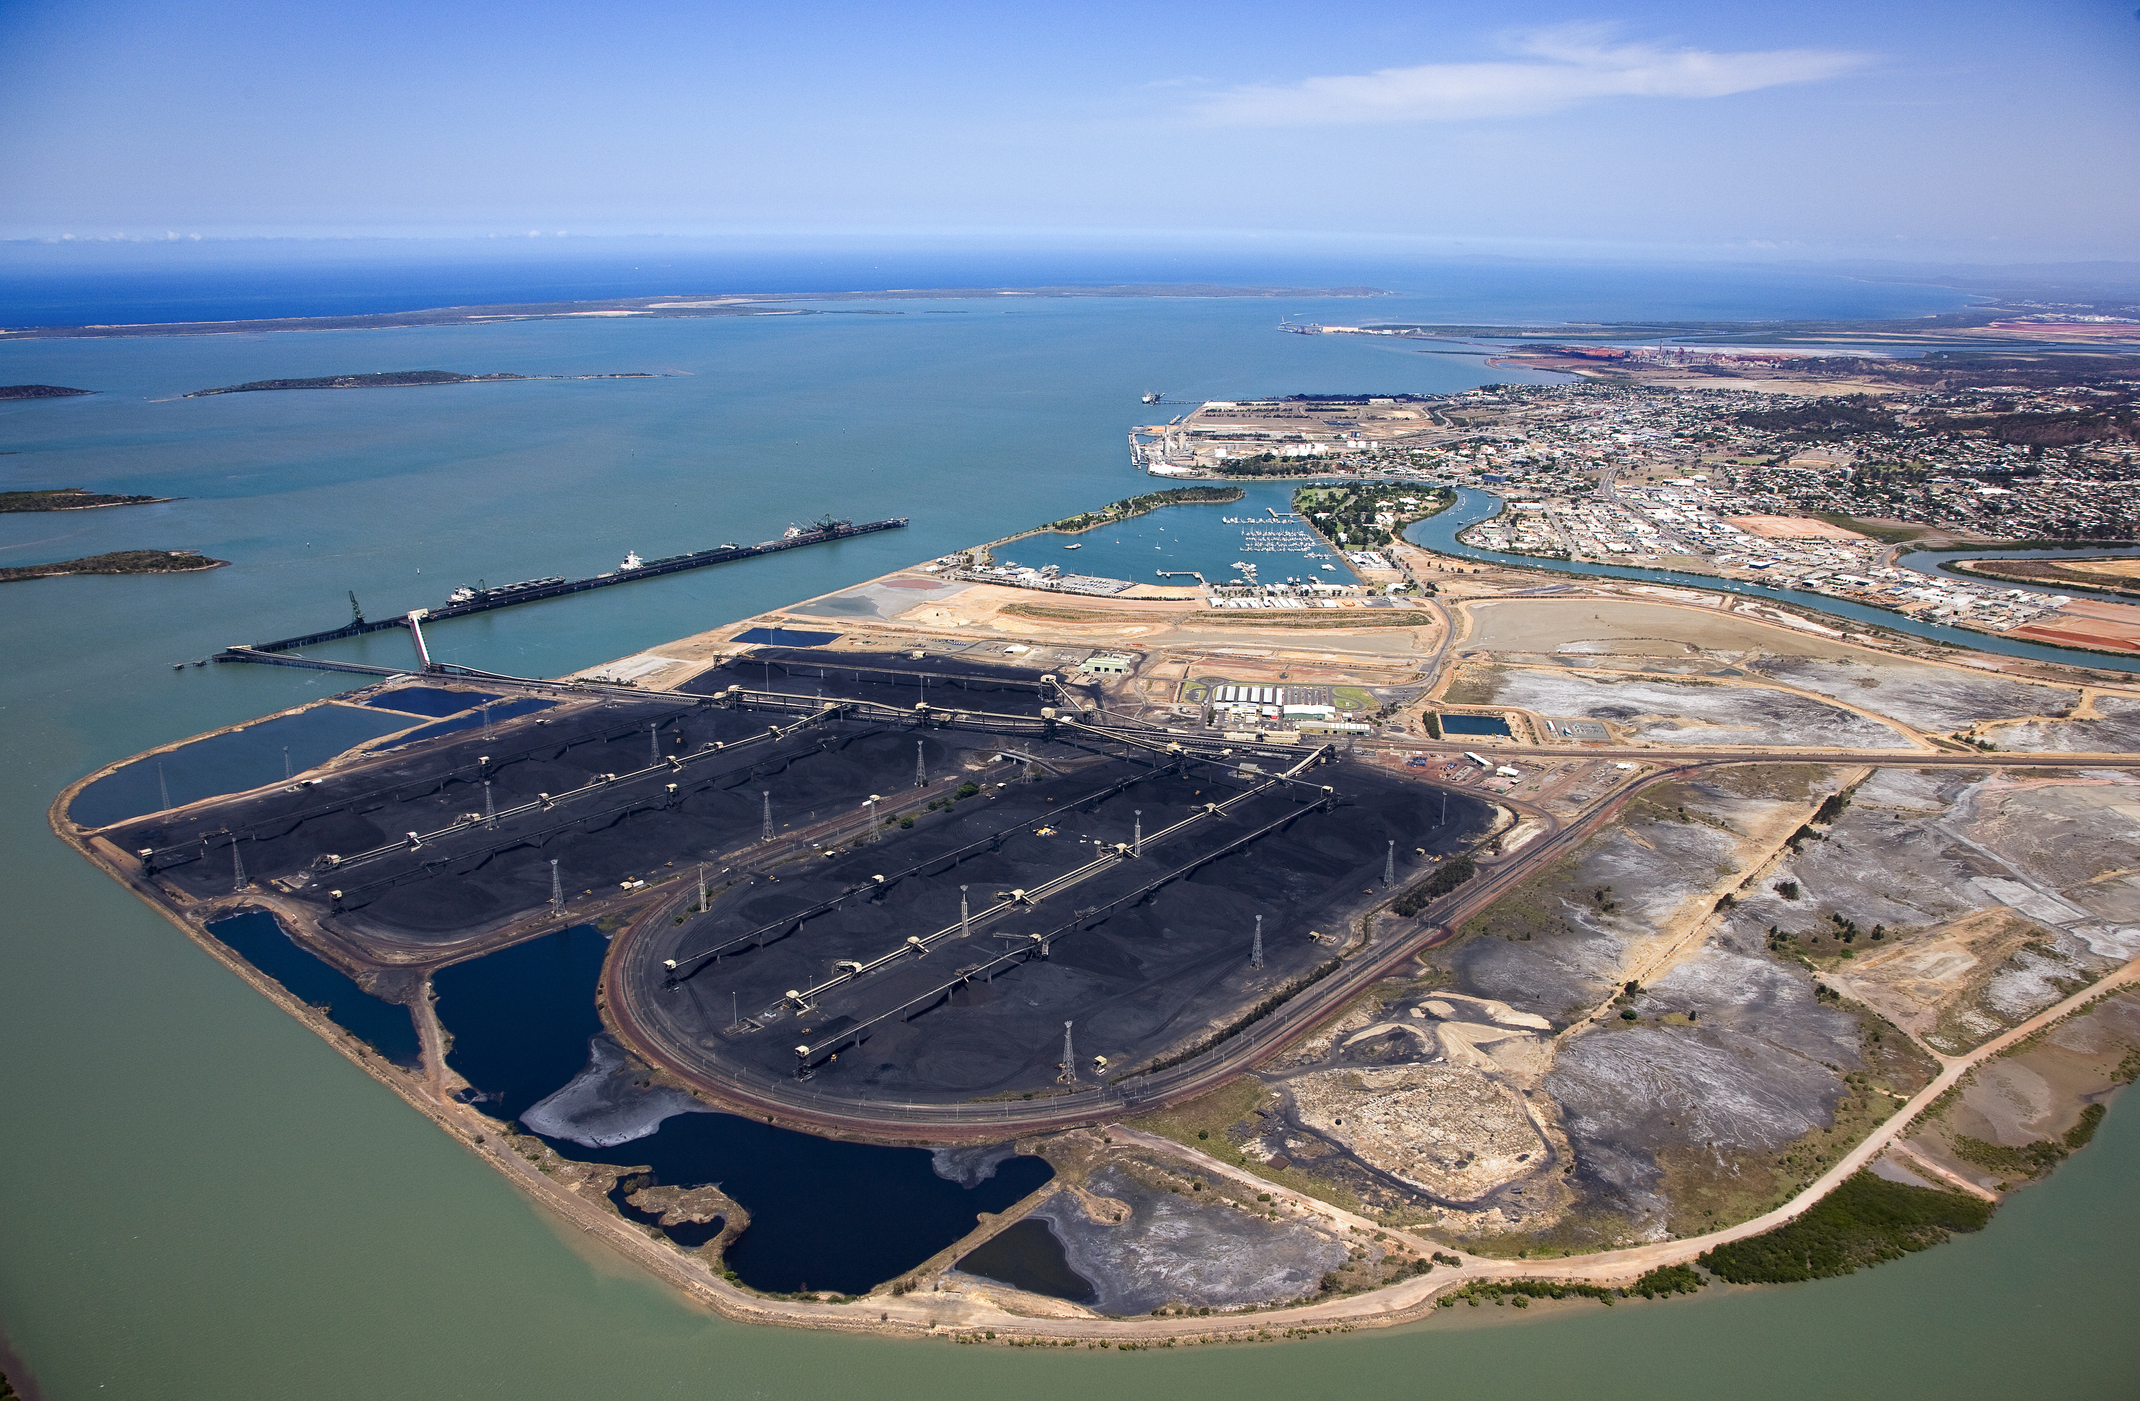 Port of Gladstone in Australia, which is the fourth largest coal exporting terminal. (PETER HARRISON/ Stone/ Getty Images)